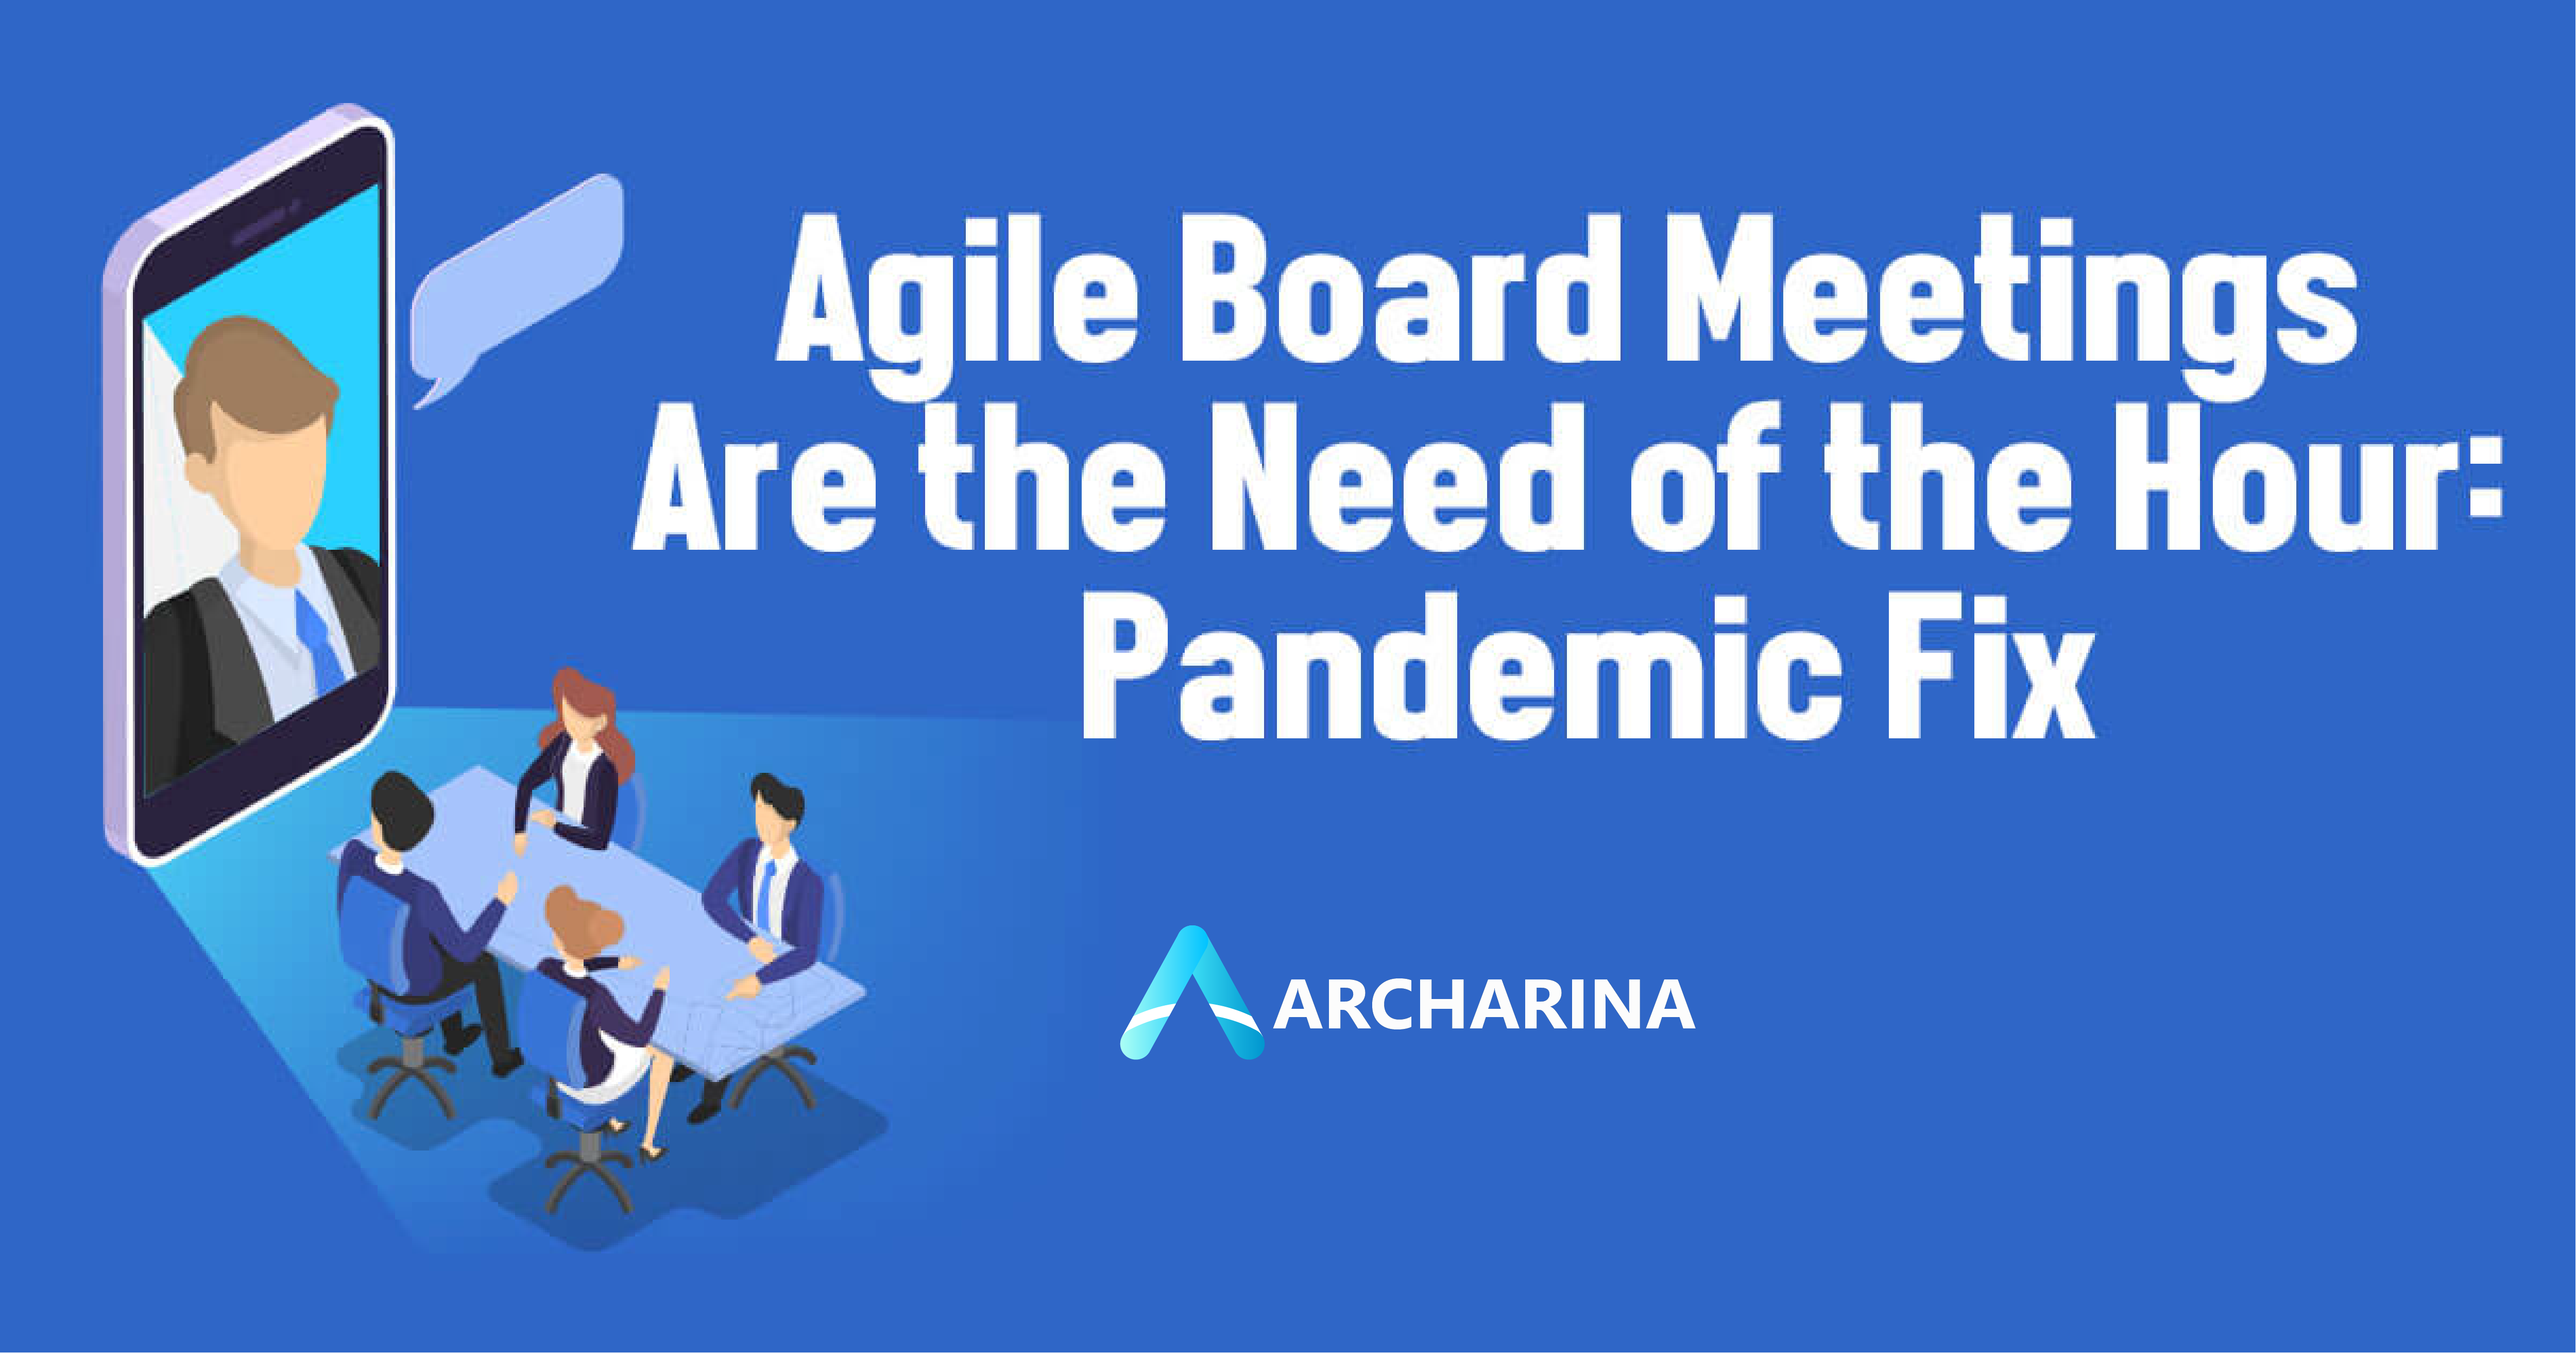 Agile Board Meetings are the need of the hour: Pandemic fix